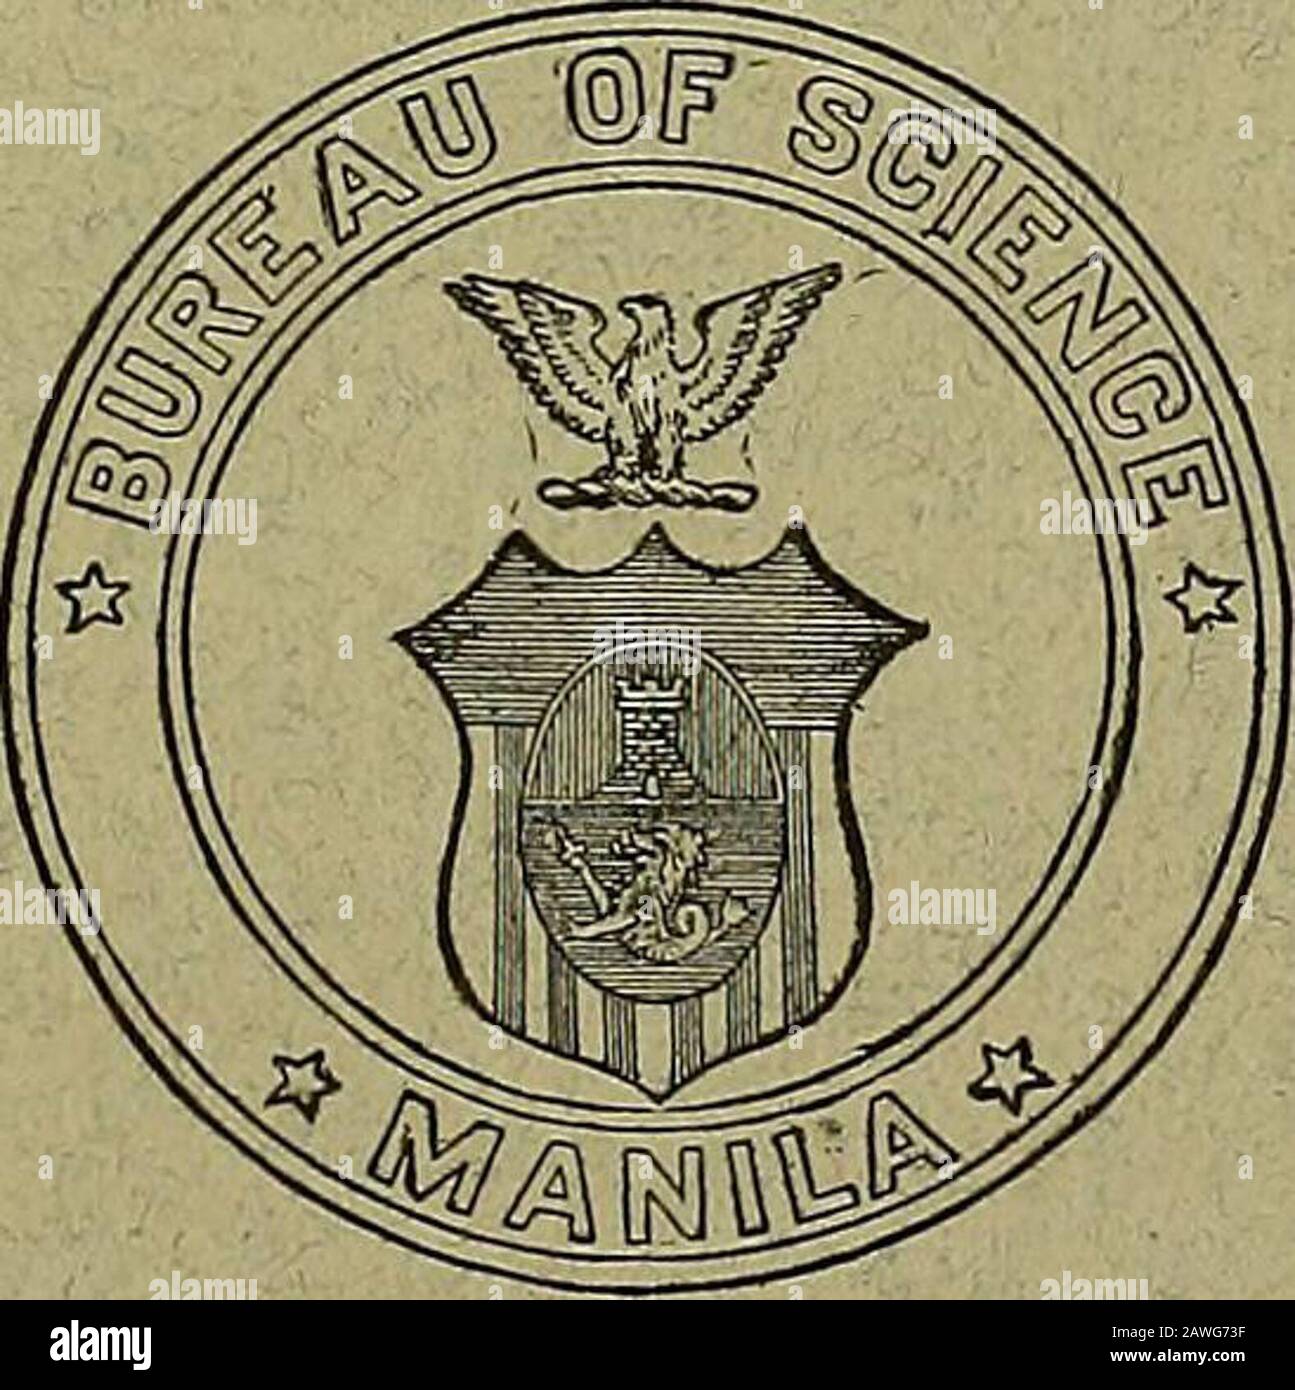 The Philippine journal of science . MANILA BUREAU OP PRINTING 1909 PEEVI0TJ8 PTTBLIOATIONS. Ordpr yiQ  Bureau of Government Laboratories. *No. 1, 1902, to No. Ui, 190J,.15. No. 15, 1904, Biological and Scrum Laboratories.—Report on Bacillus Violacevus Ma-nilfe : A Pathogenic Micro-Organism- By Paul G. Woolley, M. D. *No. 16, 1904, Biological Lahoratory.—Protective Inoculation against Asiatic Cholera :An Experimental Study. By Richard P. Strong, M. D.17. No. 11, 1904.—New or Noteworthy Philippine Plants, II. By Elmer D. Merrill,Botanist. *No. 18, 1904, Biological Lahoratory.—I. Amebas : Their C Stock Photo